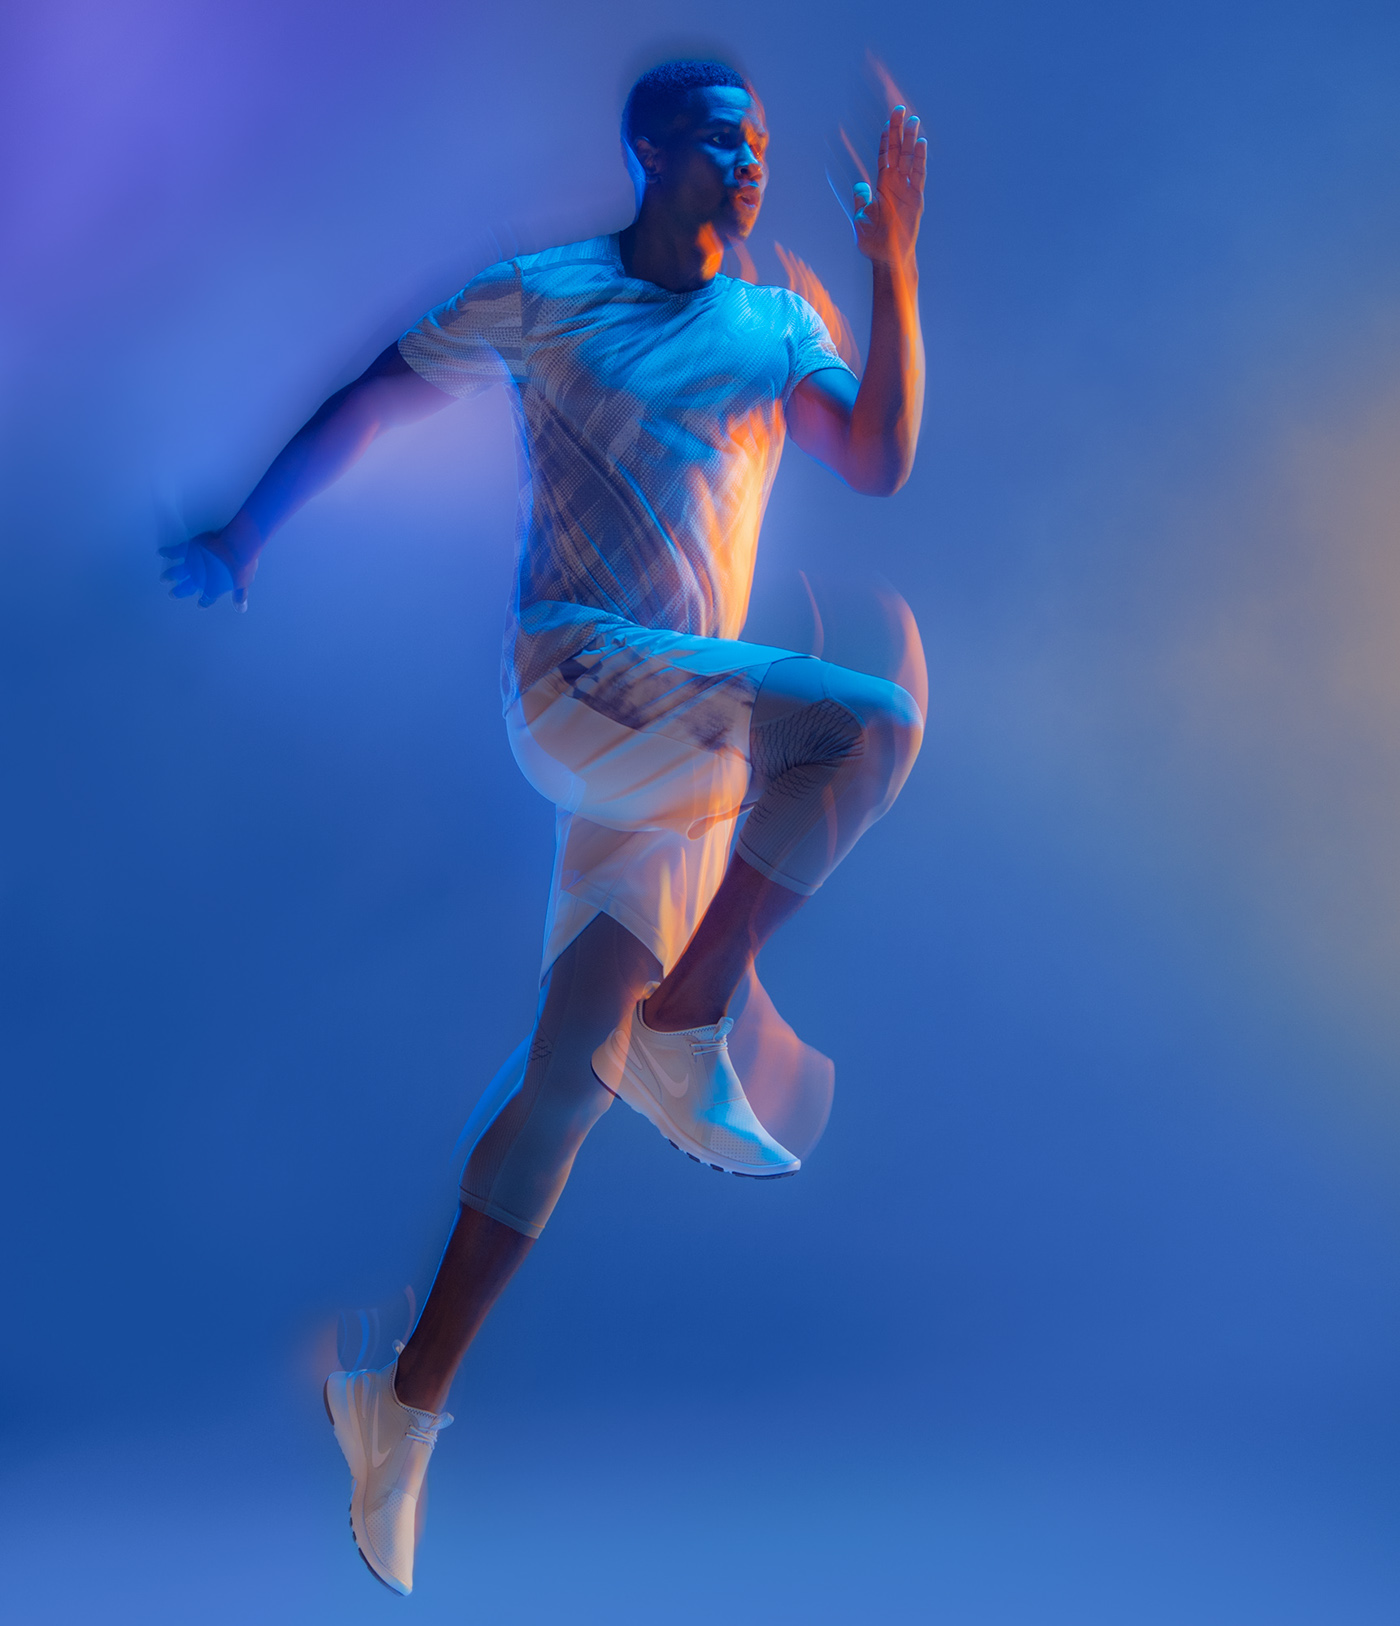 Movement in Blue on Behance